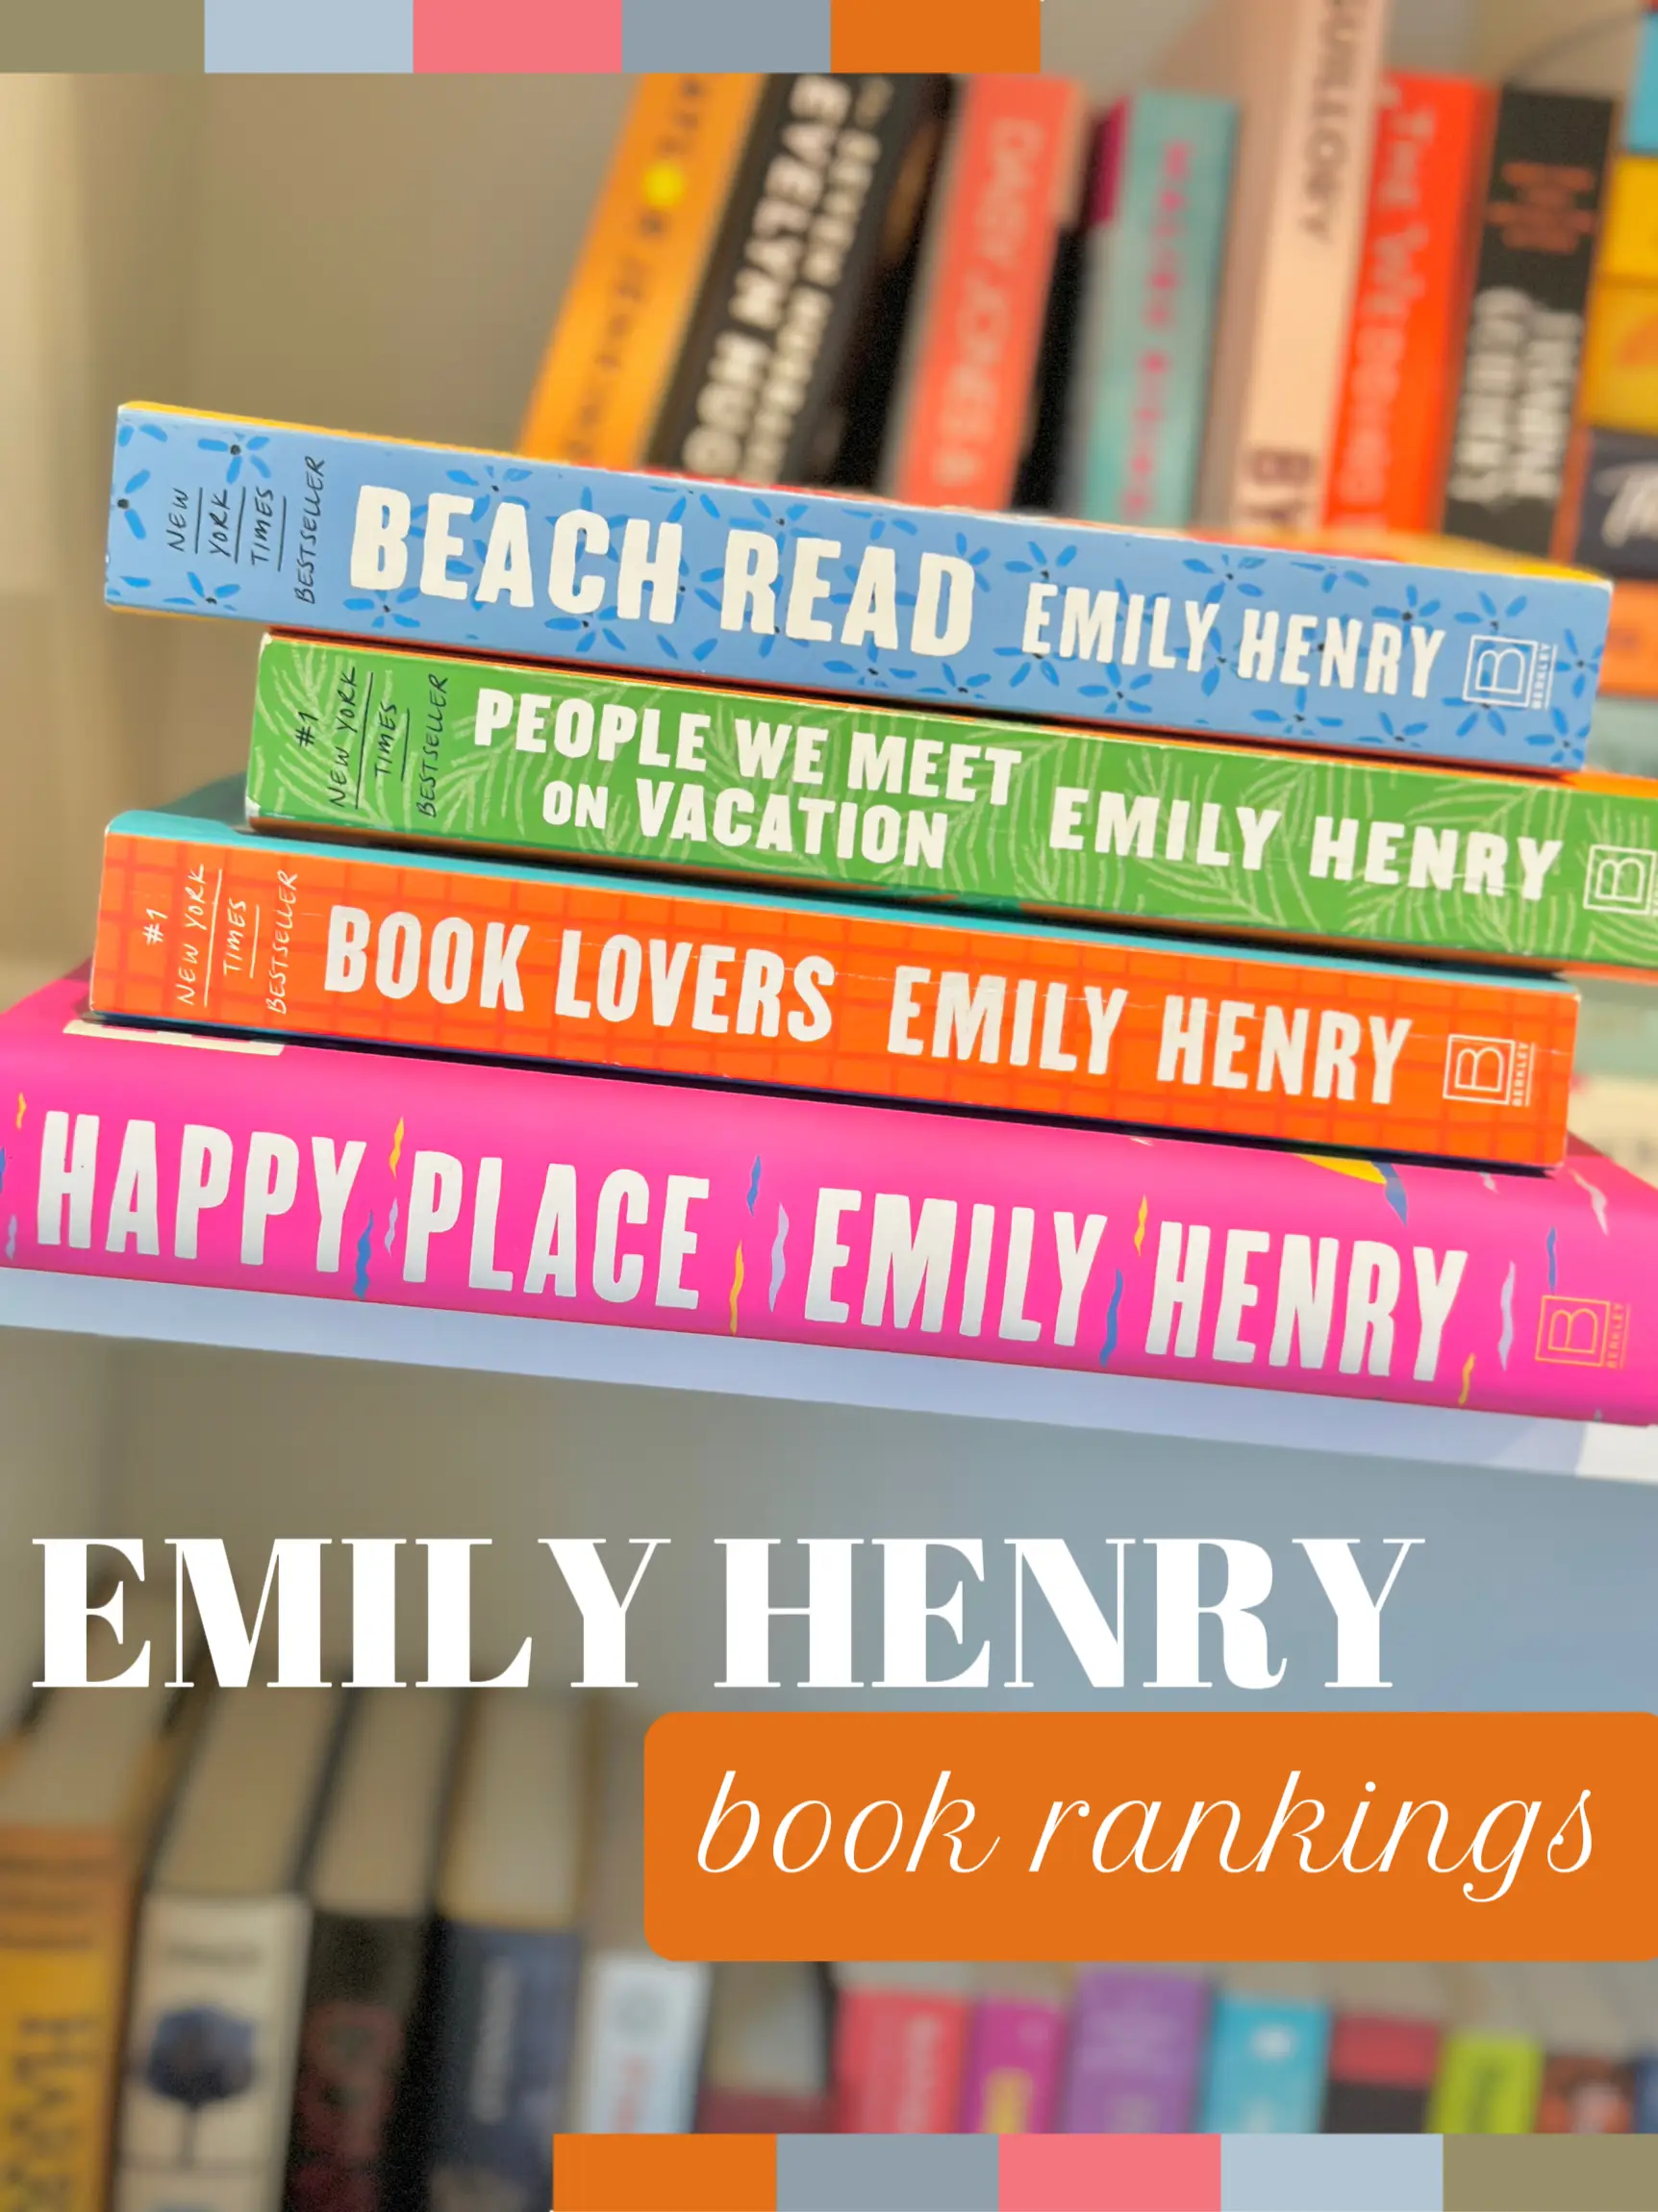 winter reads by Emily Henry - Lemon8 Search